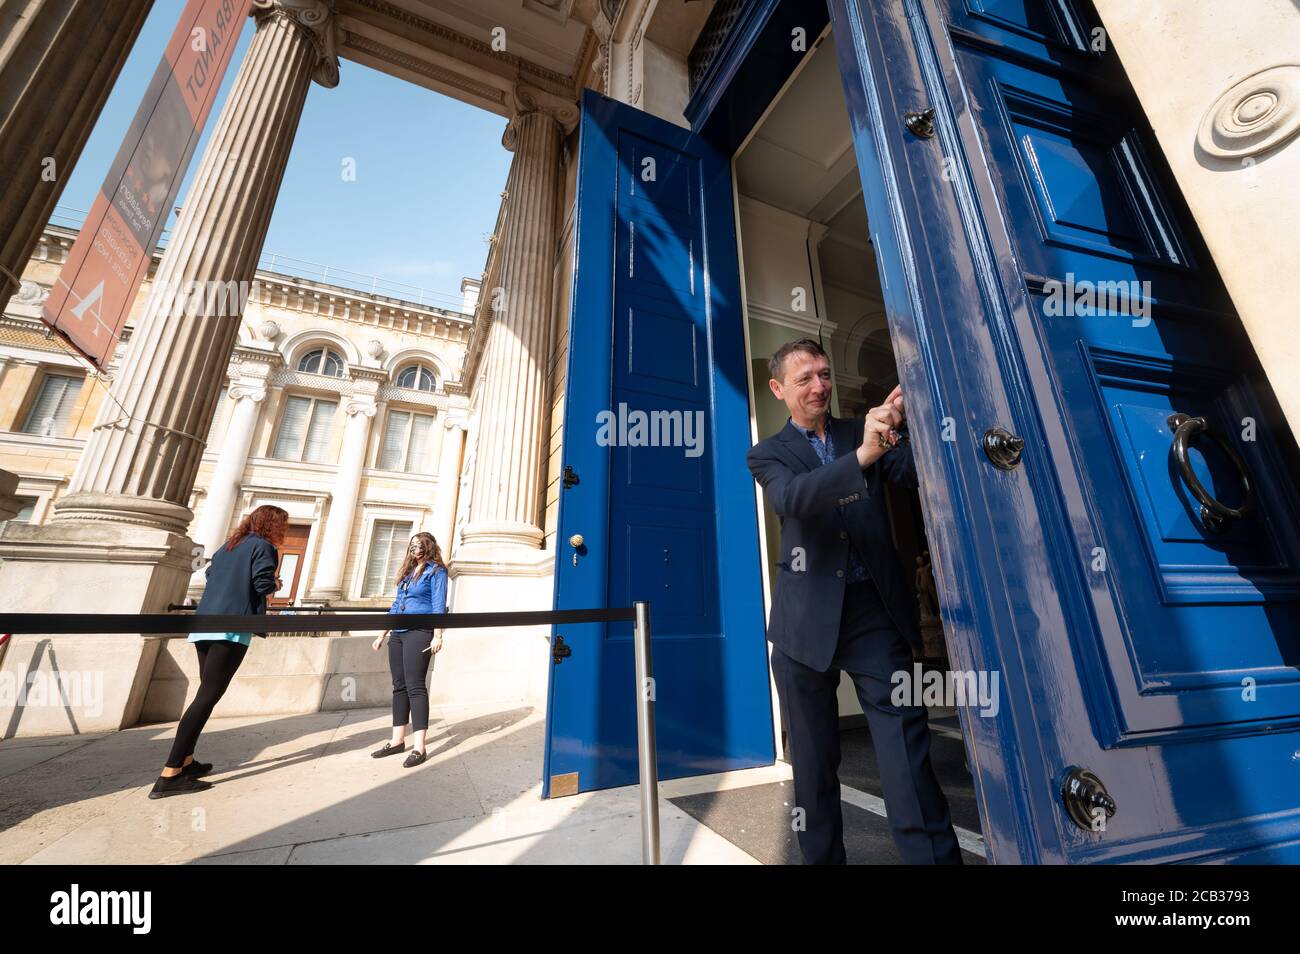 Oxford, UK. 10th Aug, 2020. Dr Xa Sturgis, Director of the Ashmolean Museum, opens the doors to the public again for the first time since lockdown started in March 2020. Credit: Andrew Walmsley/Alamy Live News Stock Photo